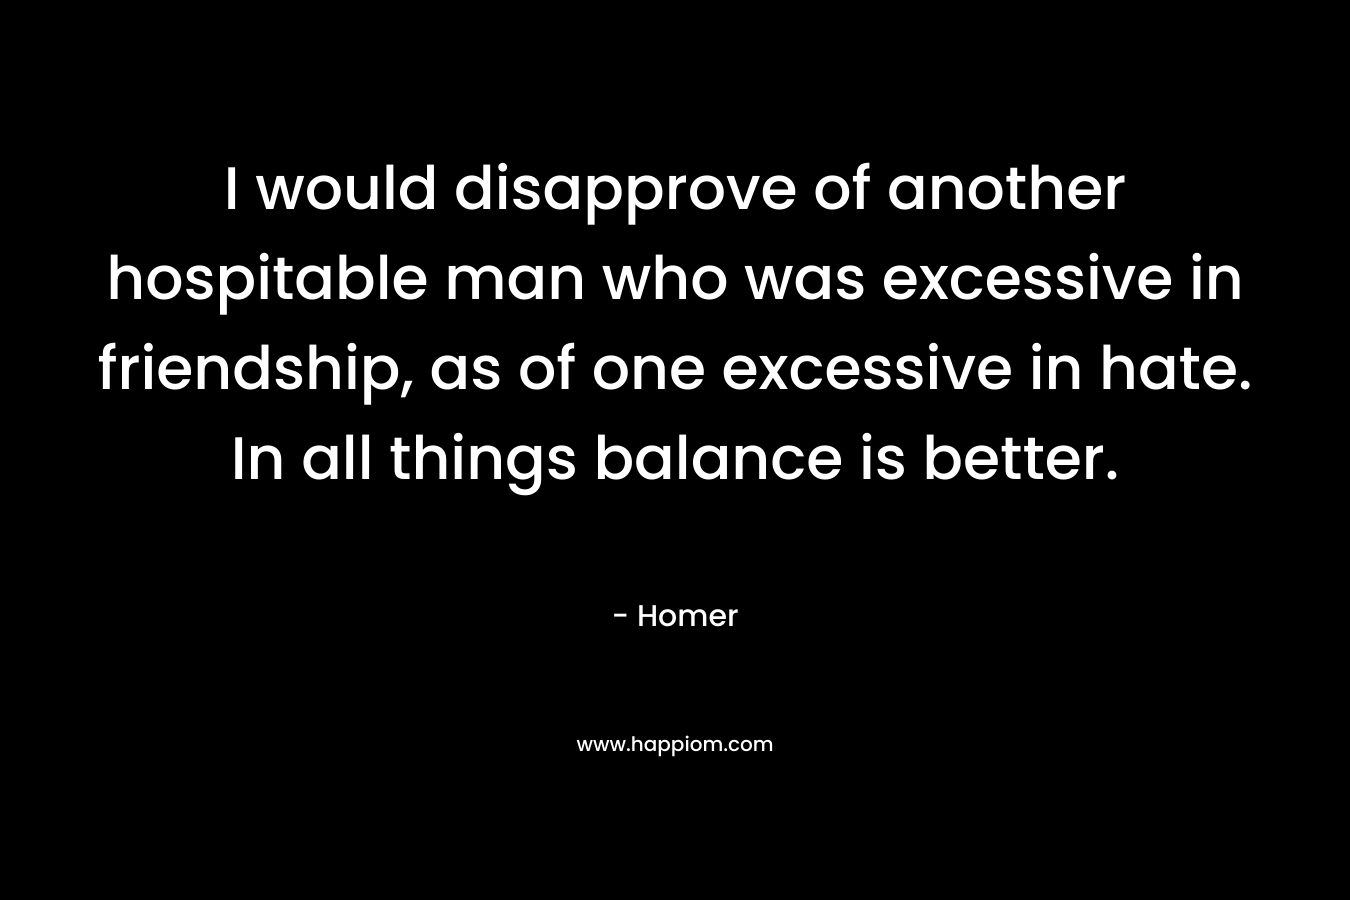 I would disapprove of another hospitable man who was excessive in friendship, as of one excessive in hate. In all things balance is better.